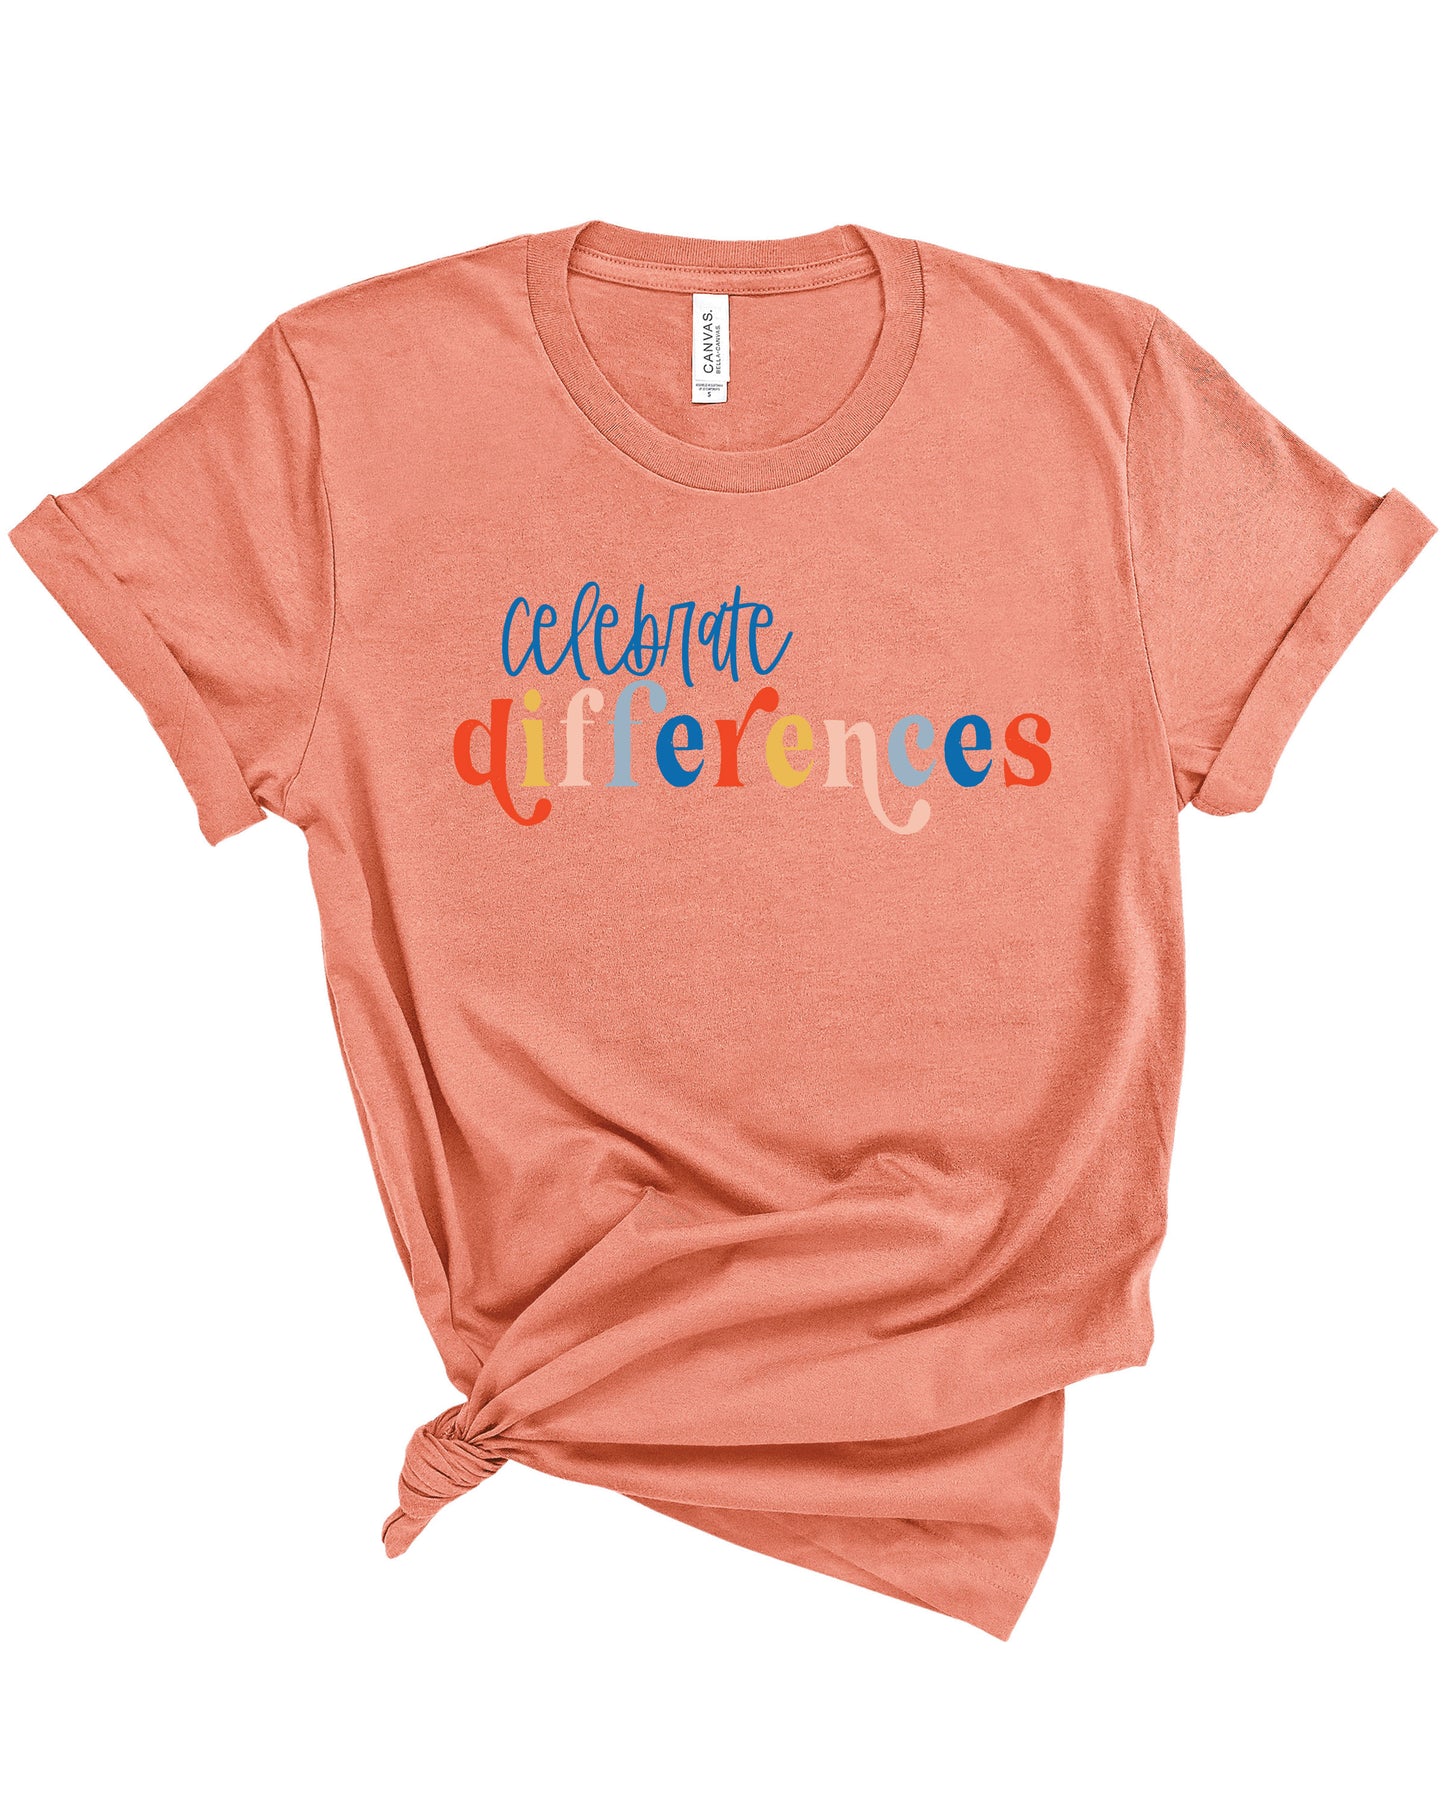 Celebrate Differences | Adult Tee-Adult Tee-Sister Shirts-Sister Shirts, Cute & Custom Tees for Mama & Littles in Trussville, Alabama.